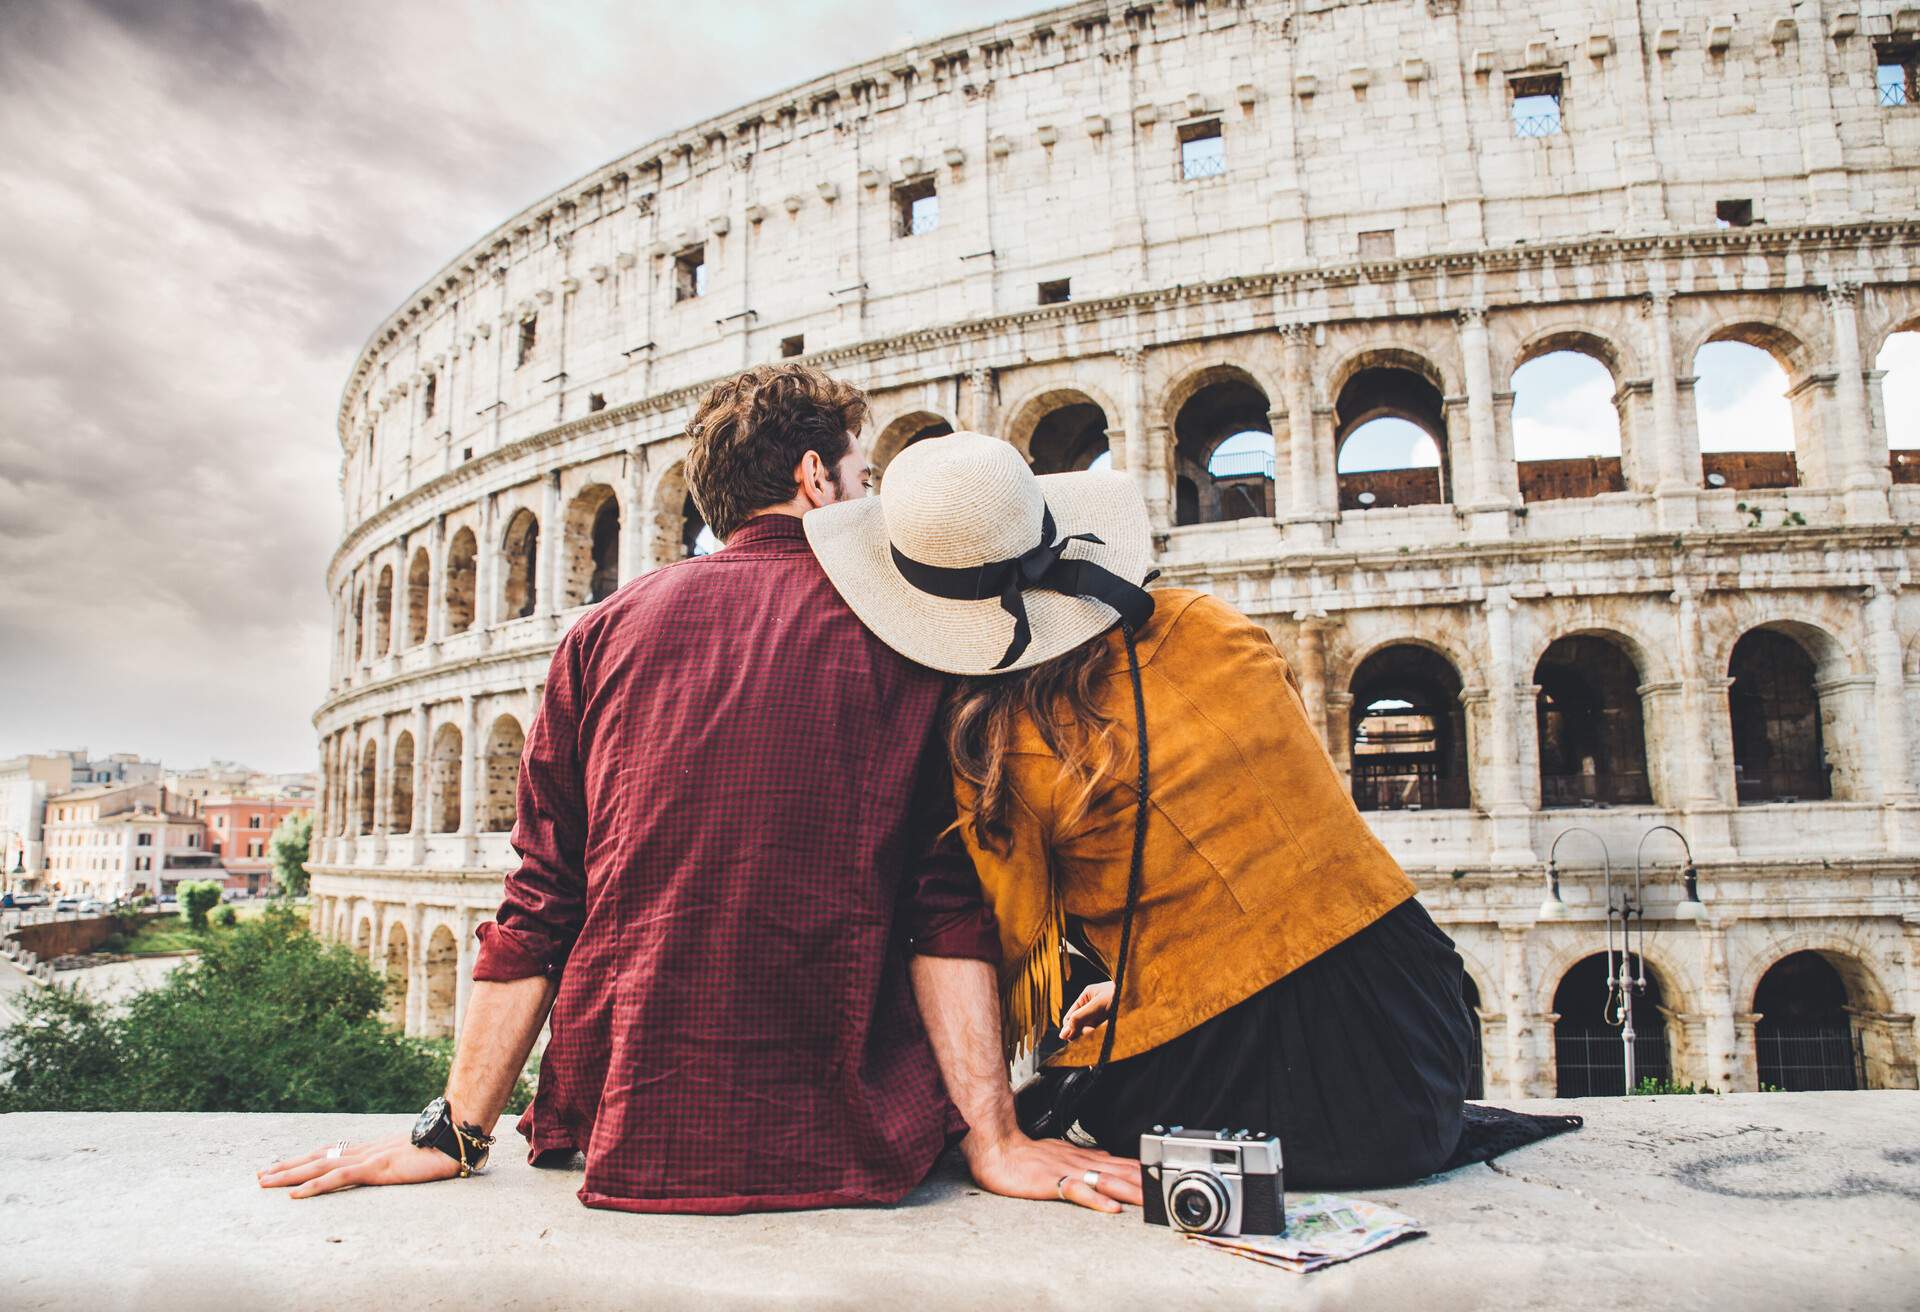 A woman in a wide-brimmed hat sits on a ledge beside a man while resting her head on his shoulder in front of Rome's Colosseum.